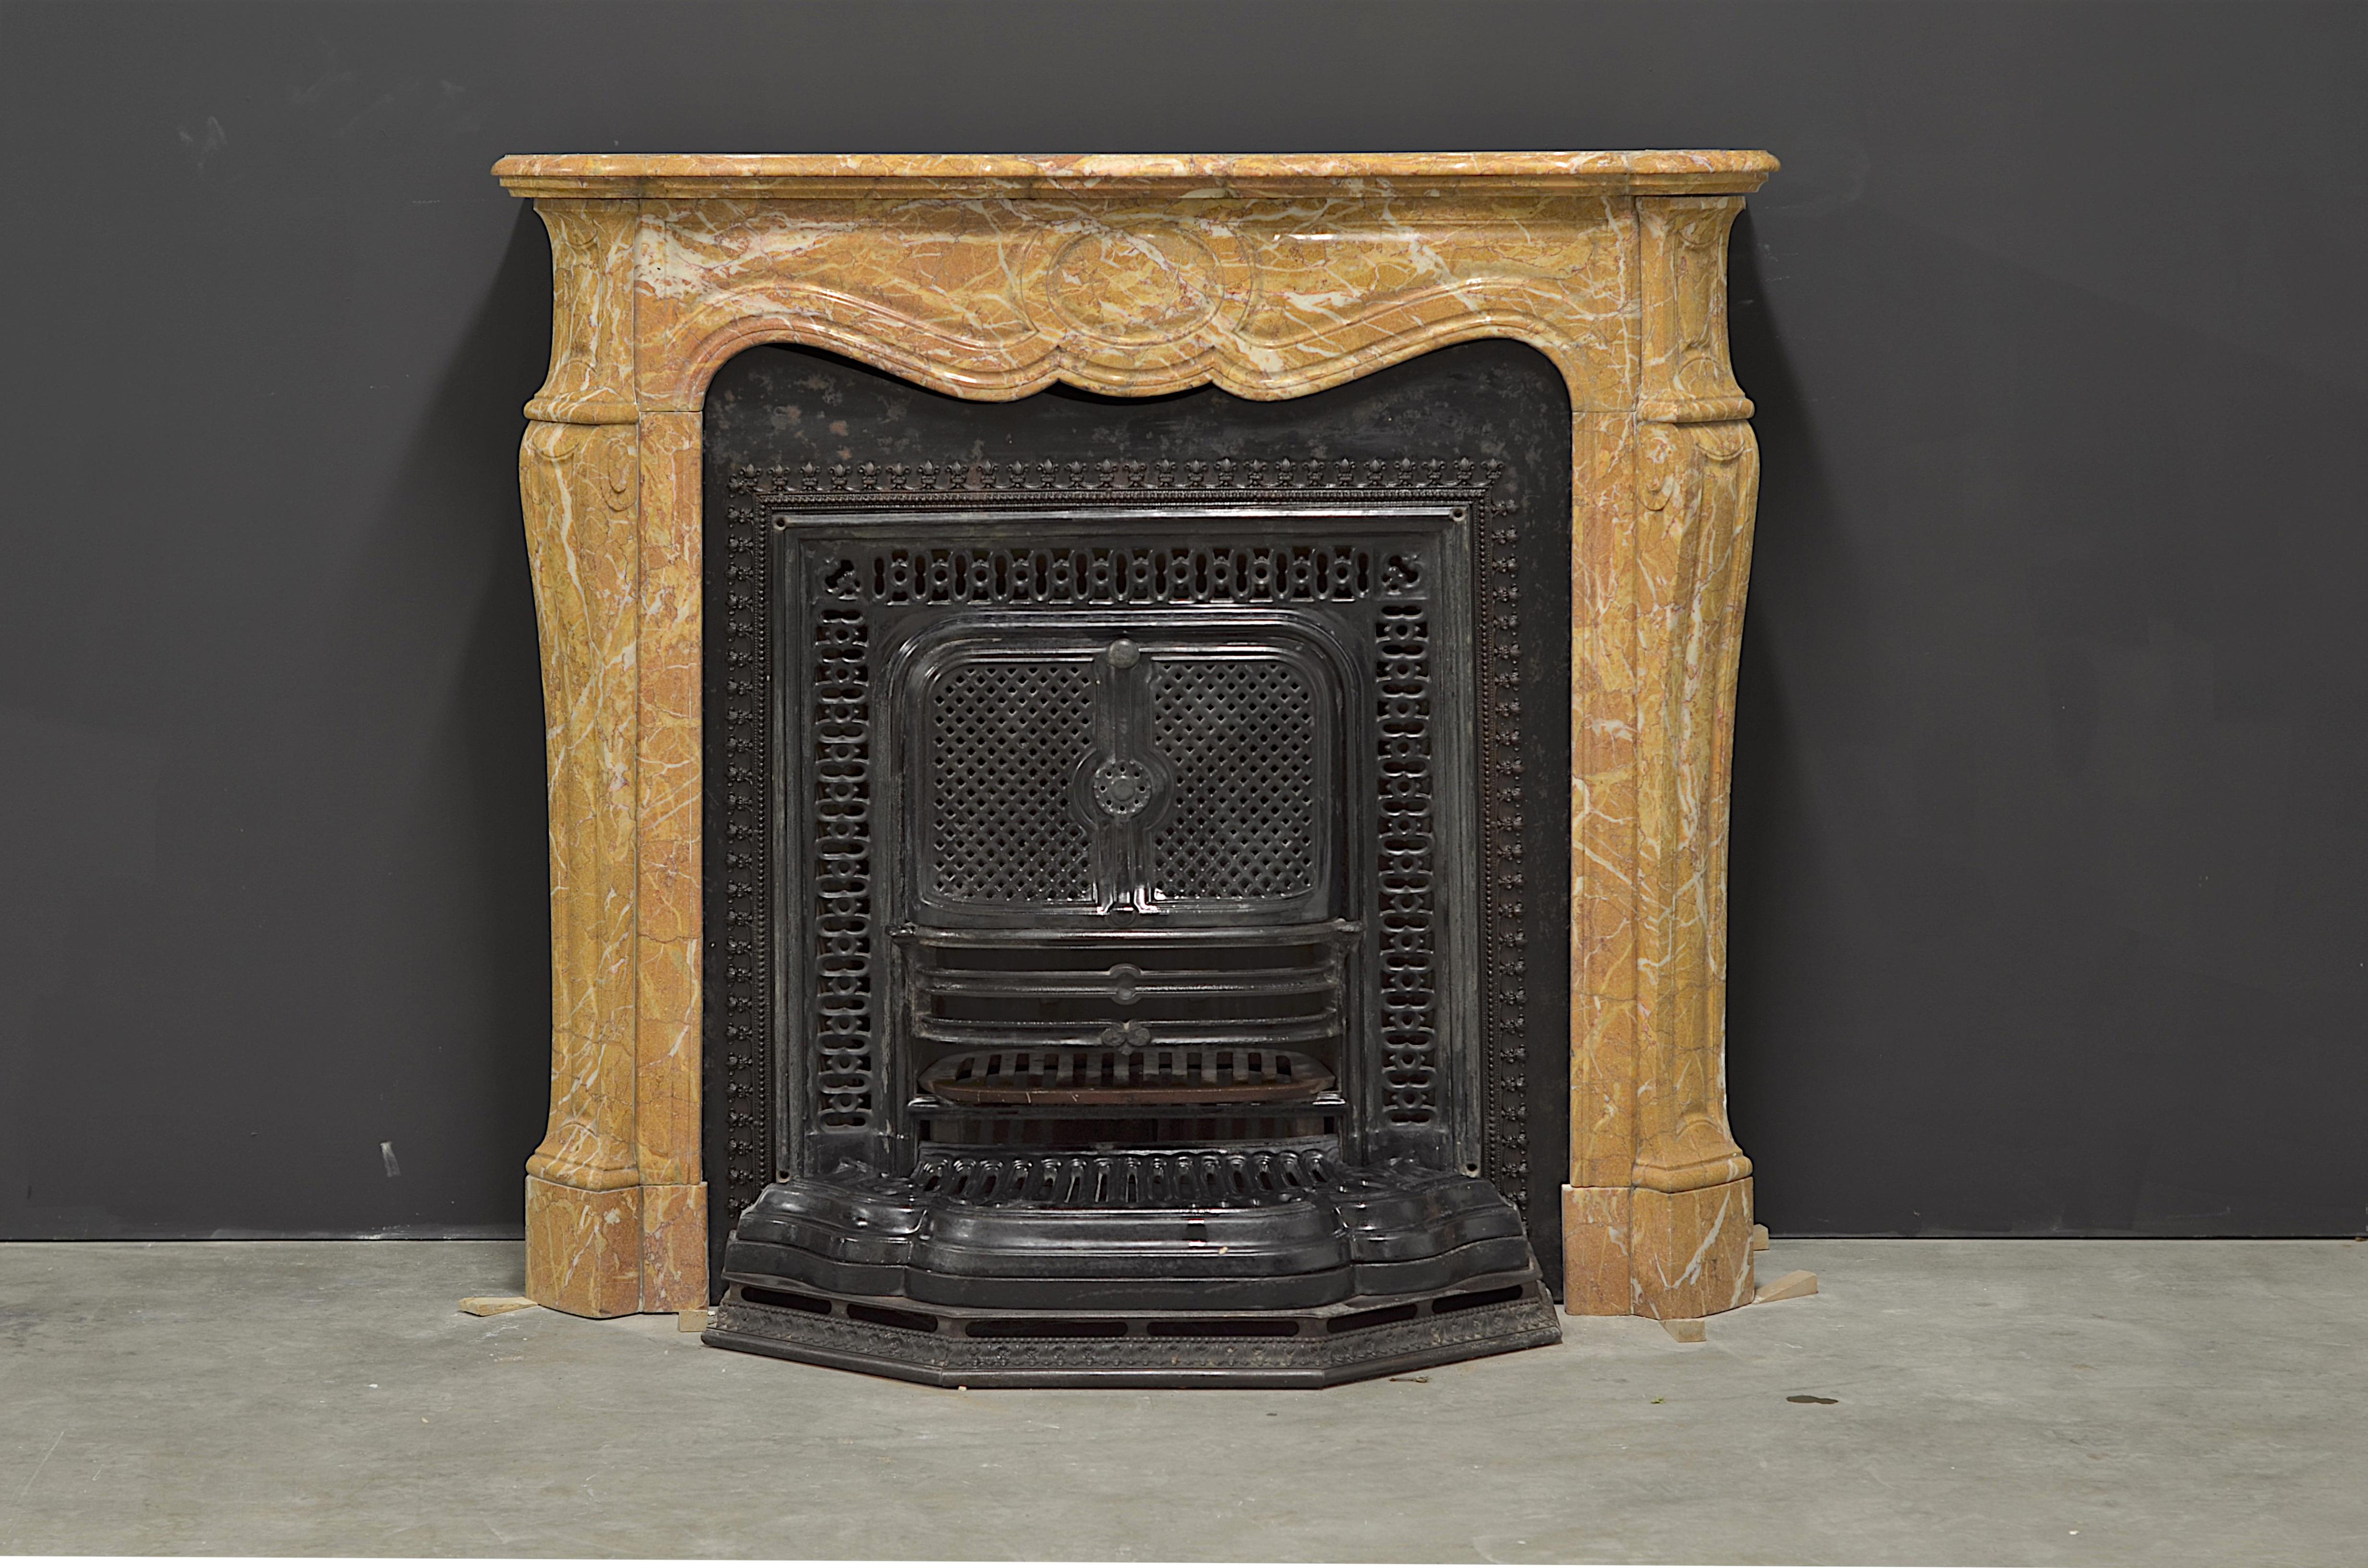 Amazingly colorful French Louis XV fireplace mantel from Paris, France.
This bright and friendly pompadour style mantel comes with cast iron stove and insert.

Great combination, perfect dimensions.
Mantel has a lot of repairs and restorations